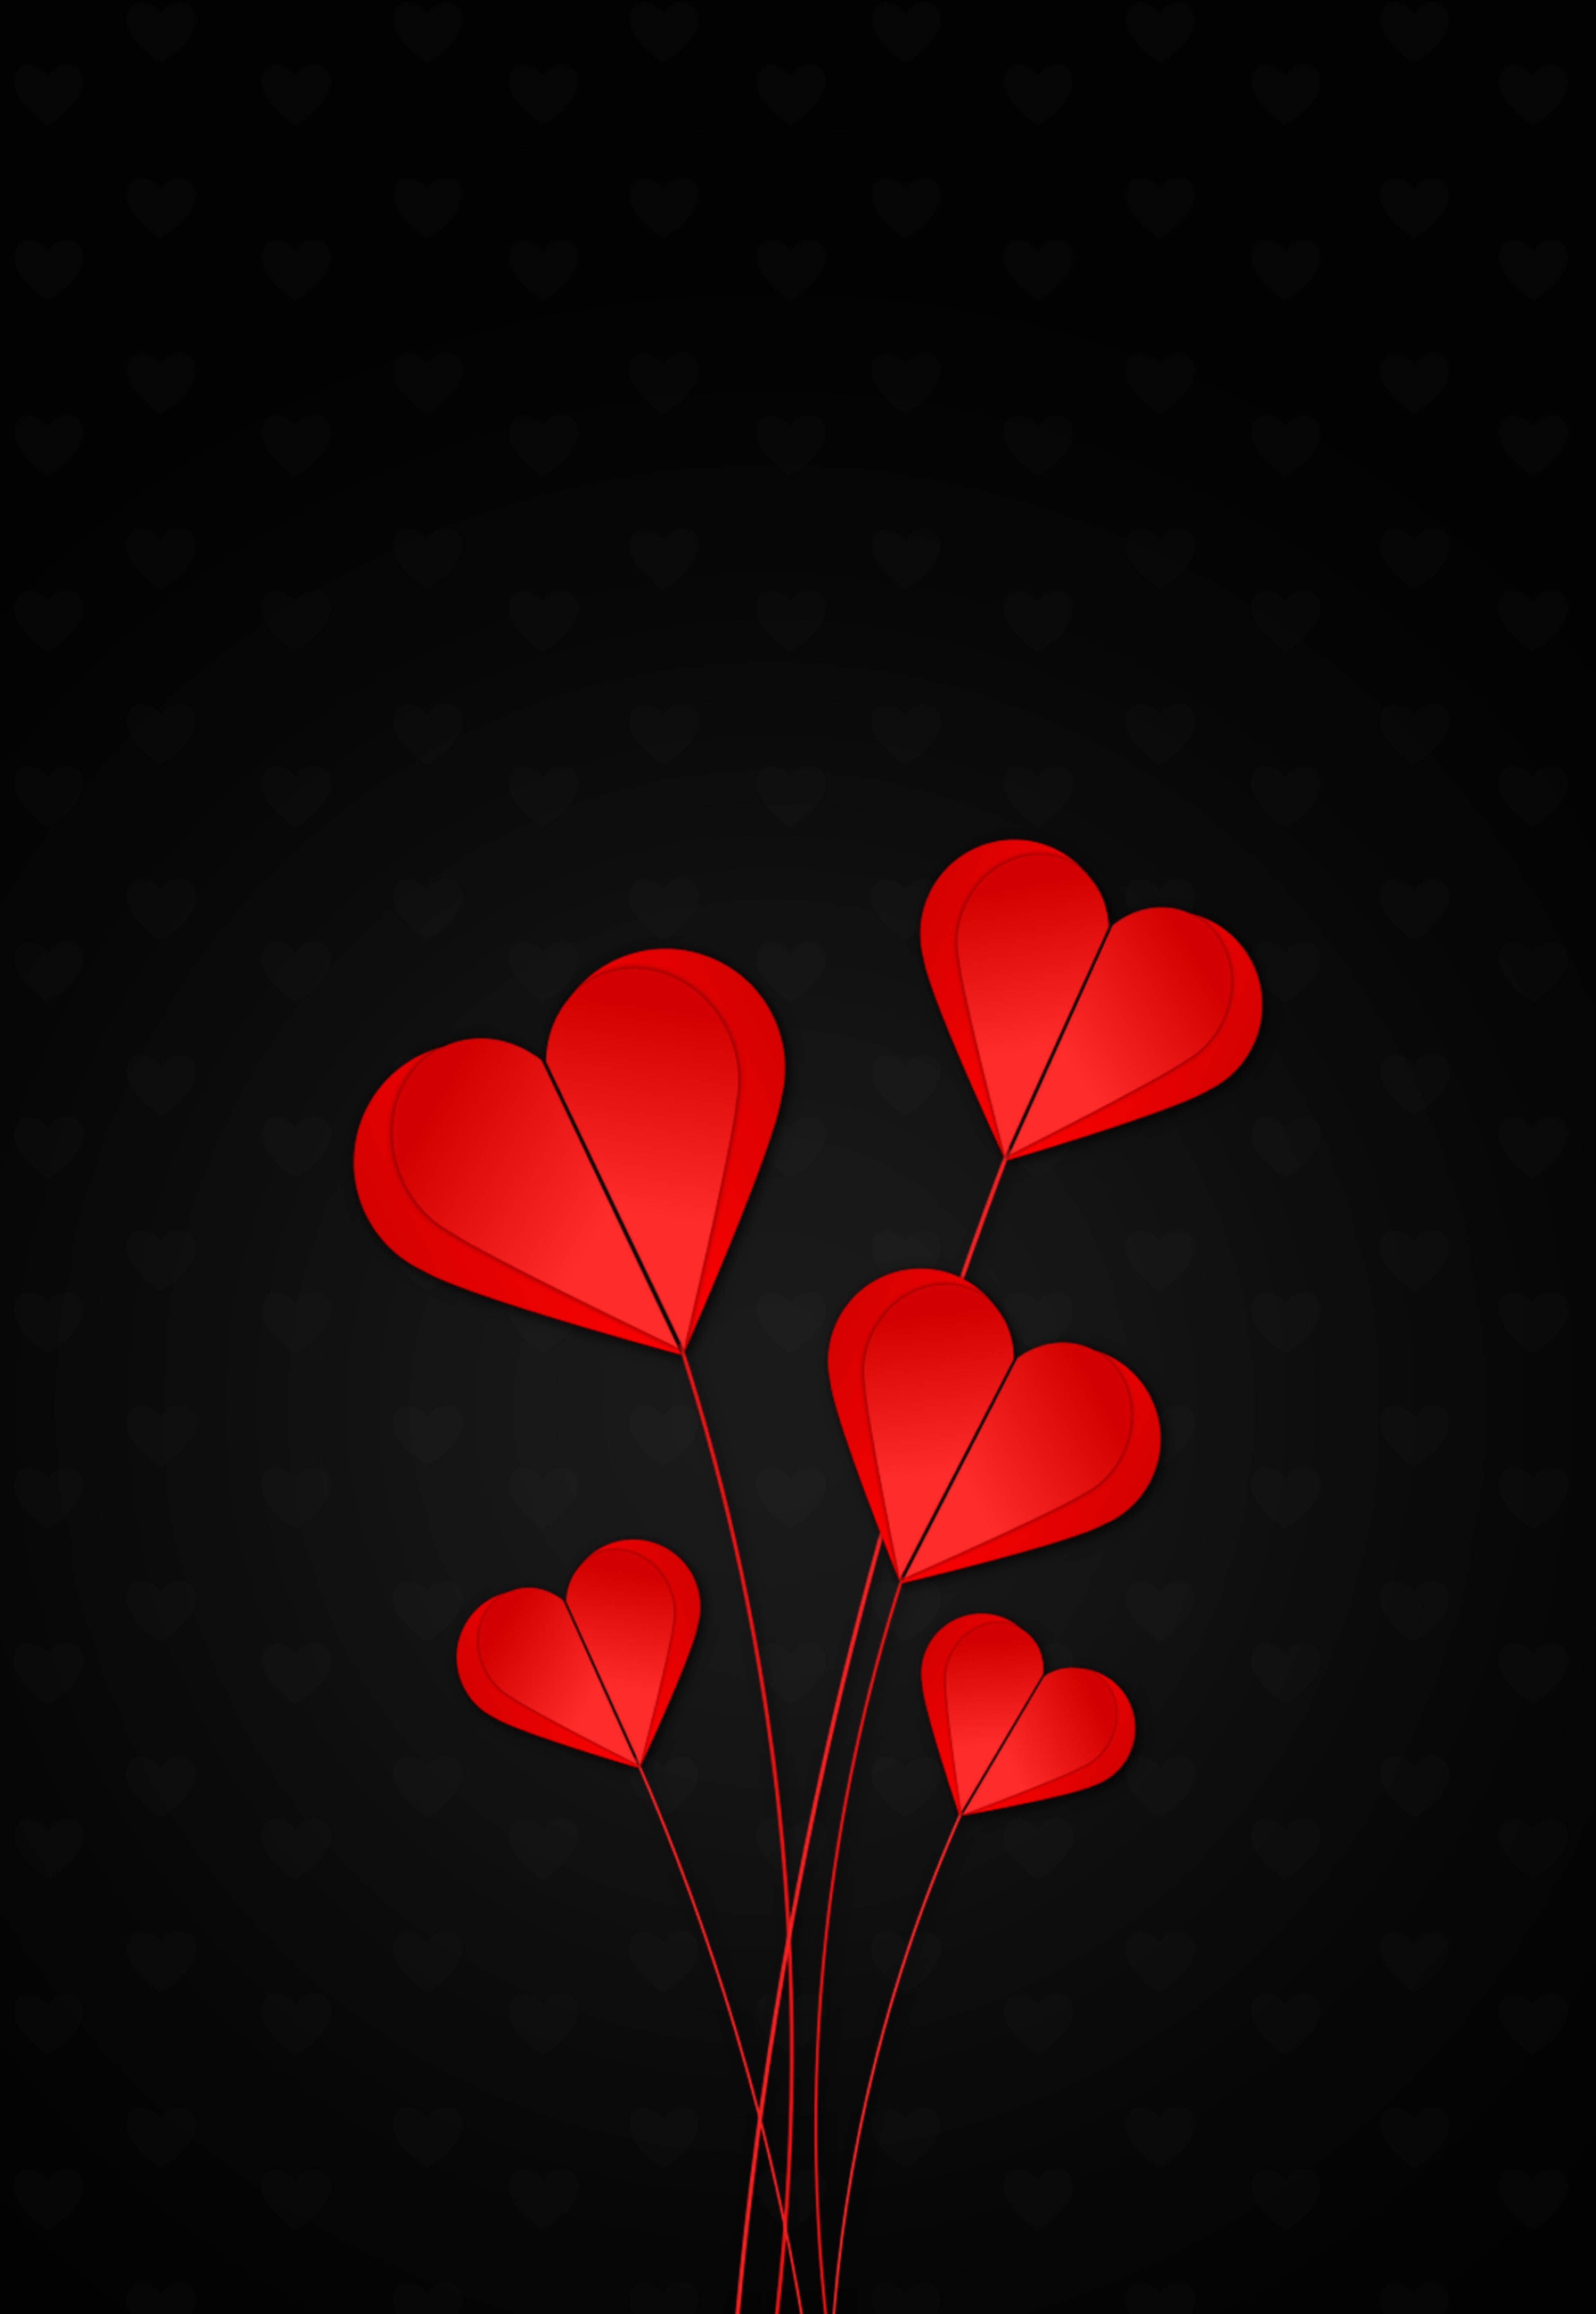 black background, hearts, love, red